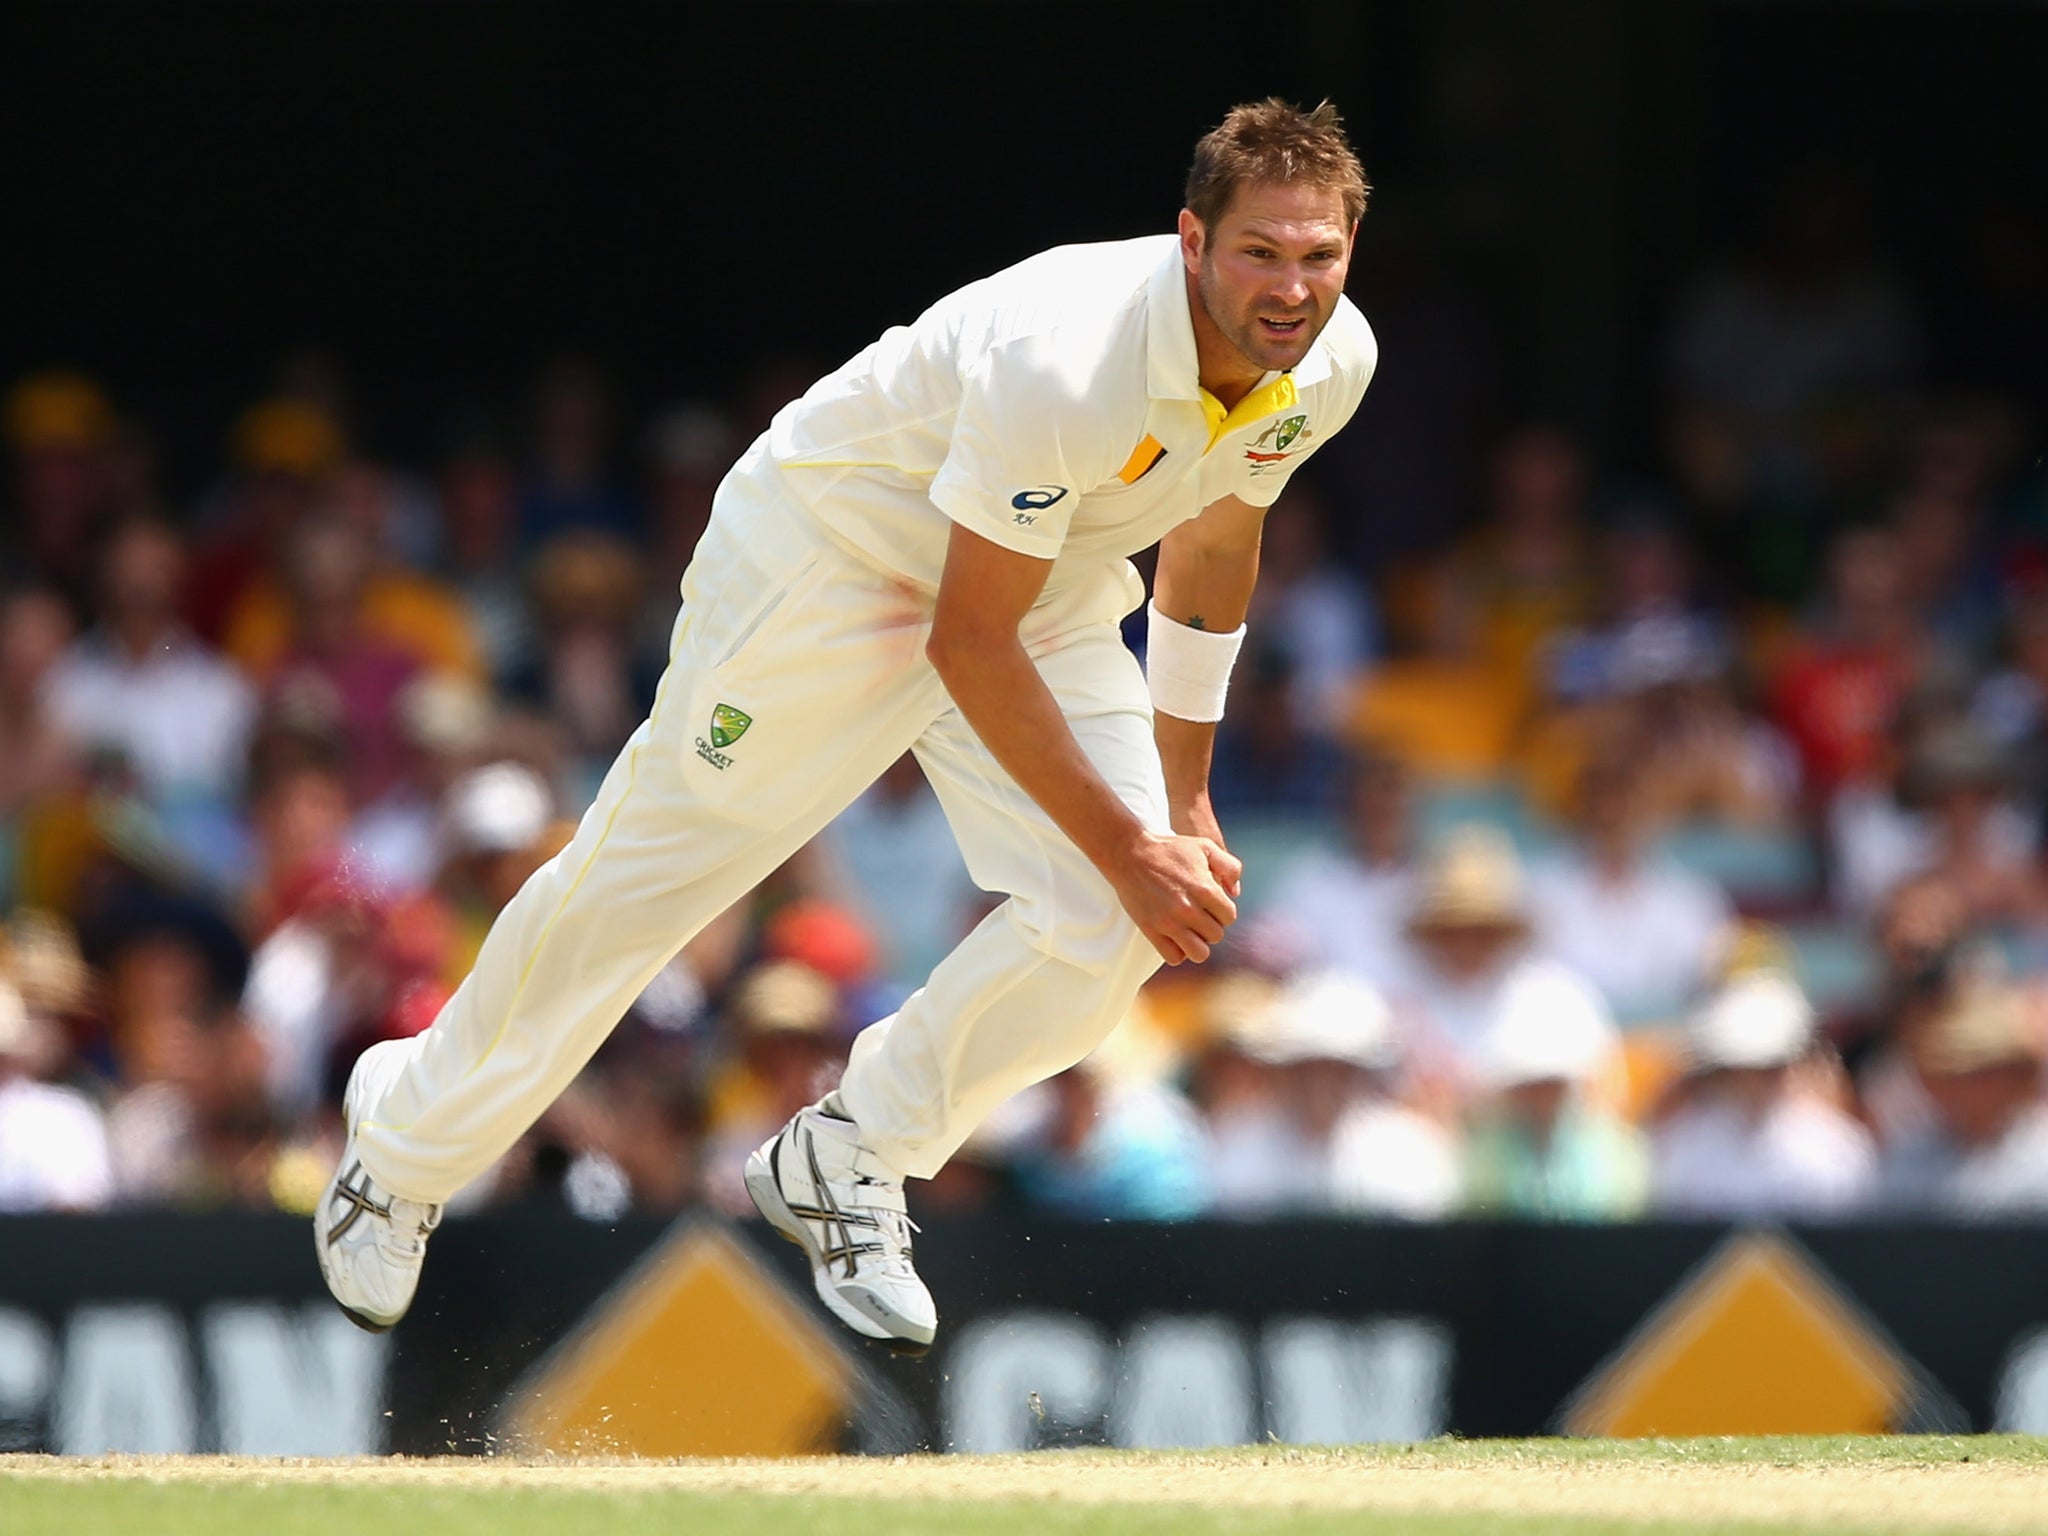 Ryan Harris has promised to come out at Adelaide with 'all guns blazing' as Australia try to take a two-nil lead in the 2013-14 Ashes